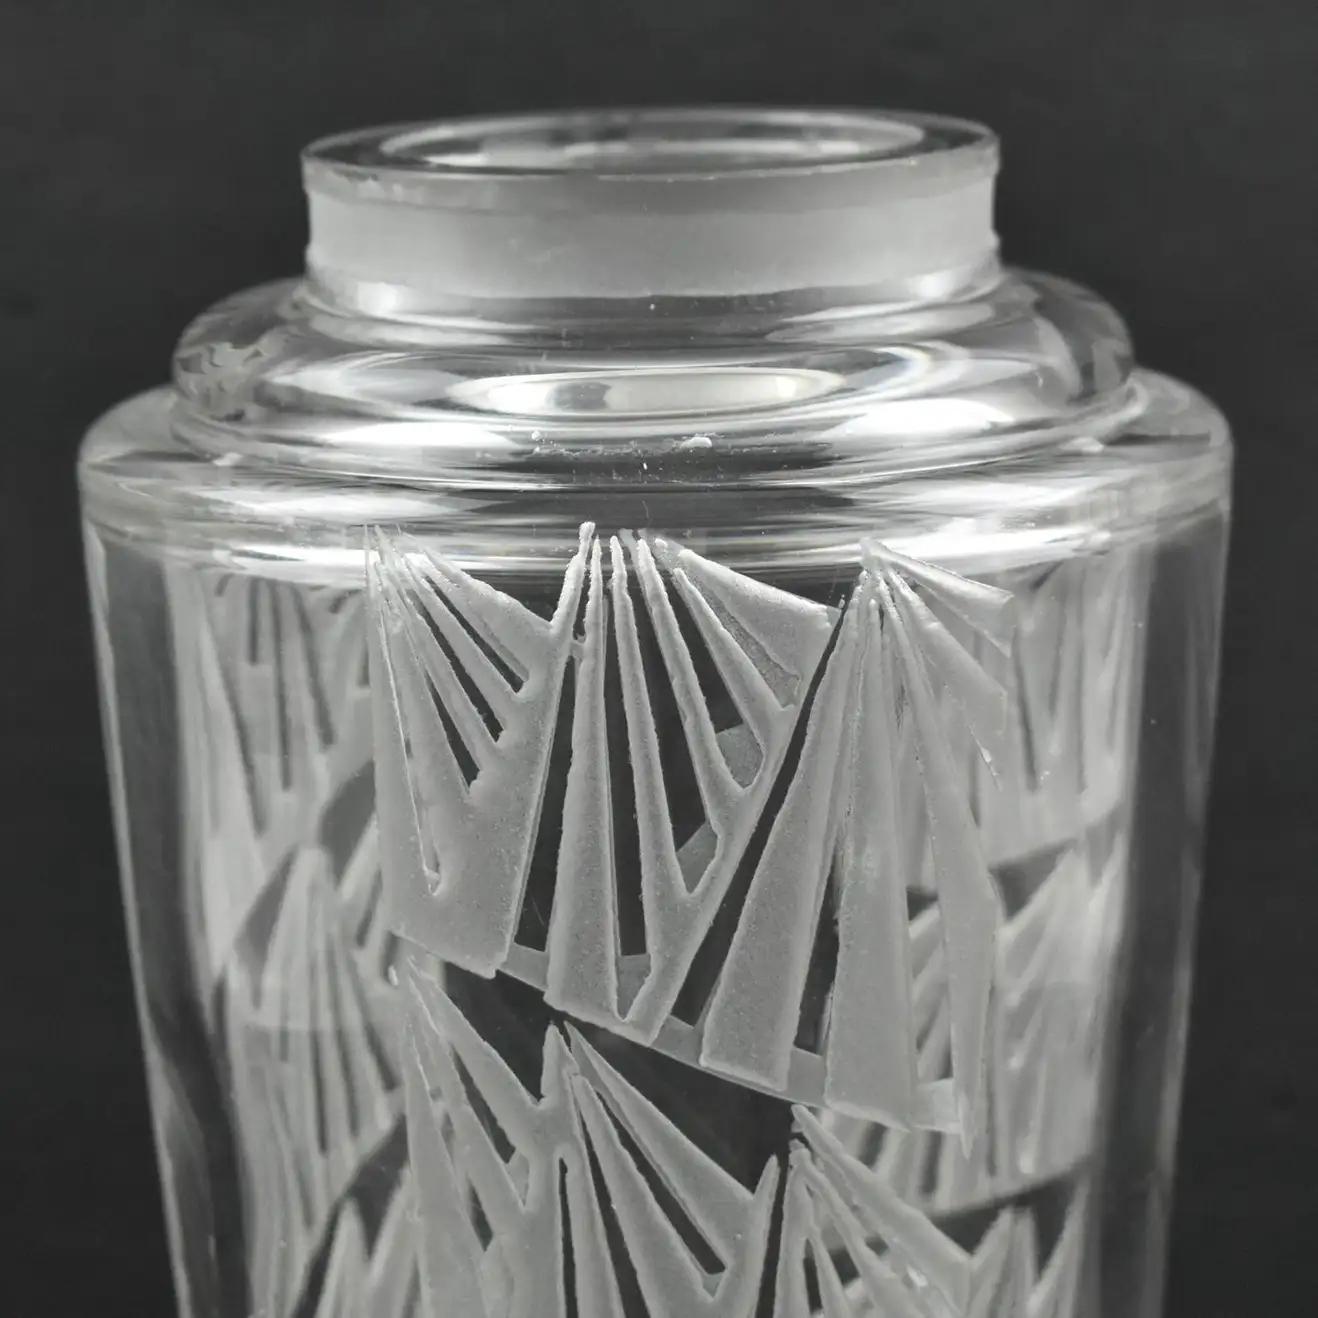 Jean Luce Art Deco Geometric Etched Glass Vase, 1930s For Sale 4